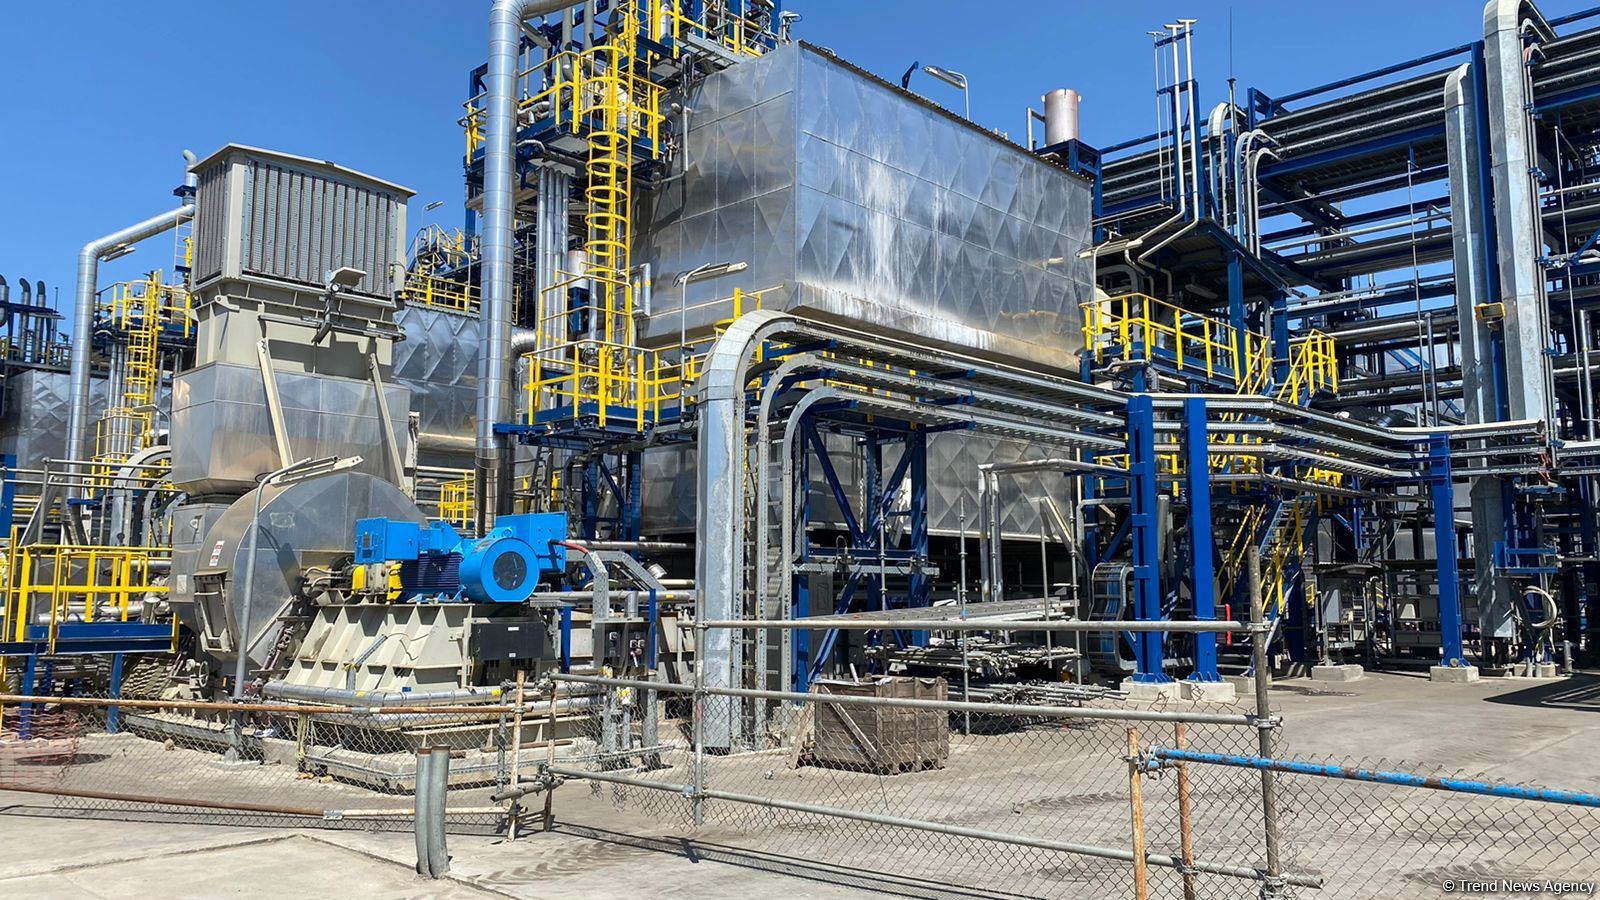 Wastewater treatment equipment to be commissioned at Heydar Aliyev Baku Oil Refinery (PHOTO)